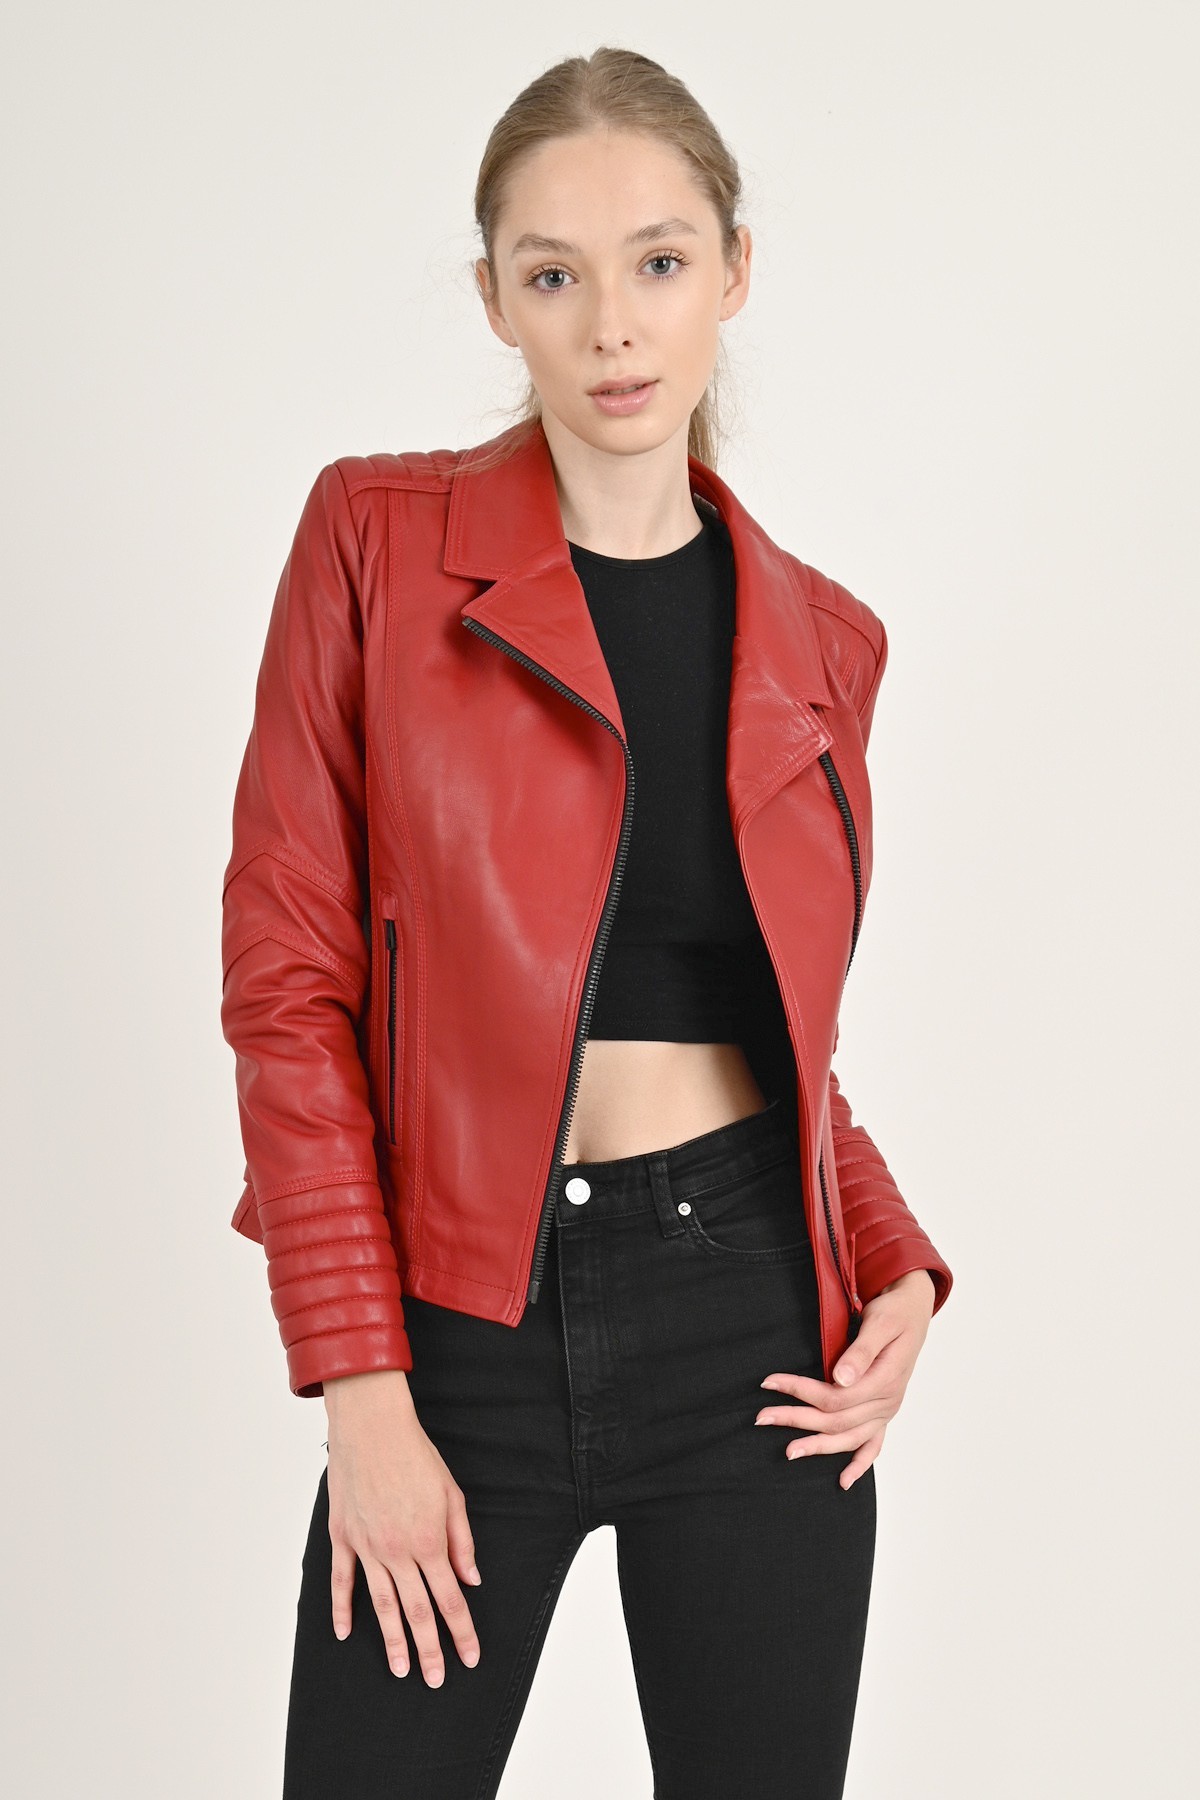 Alexa red leather jacket woman